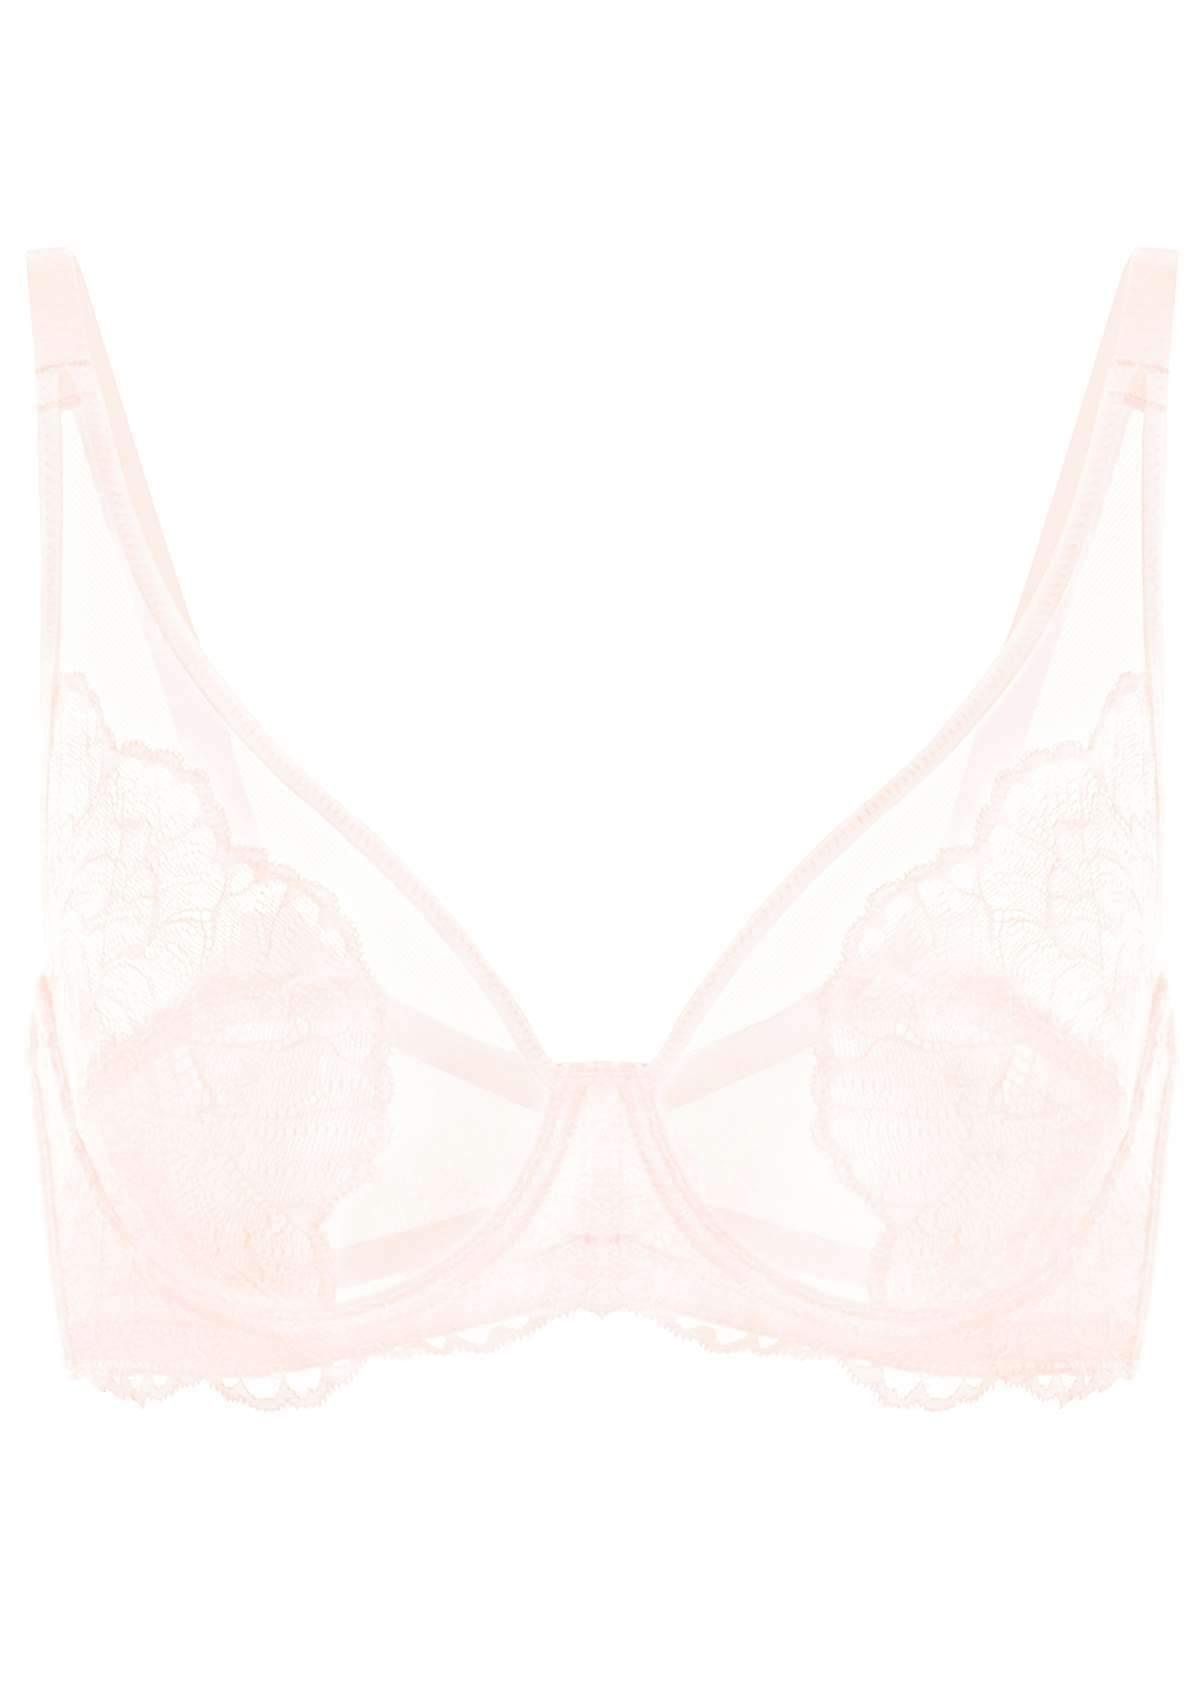 HSIA Blossom Sheer Lace Bra: Comfortable Underwire Bra For Big Busts - White / 34 / H